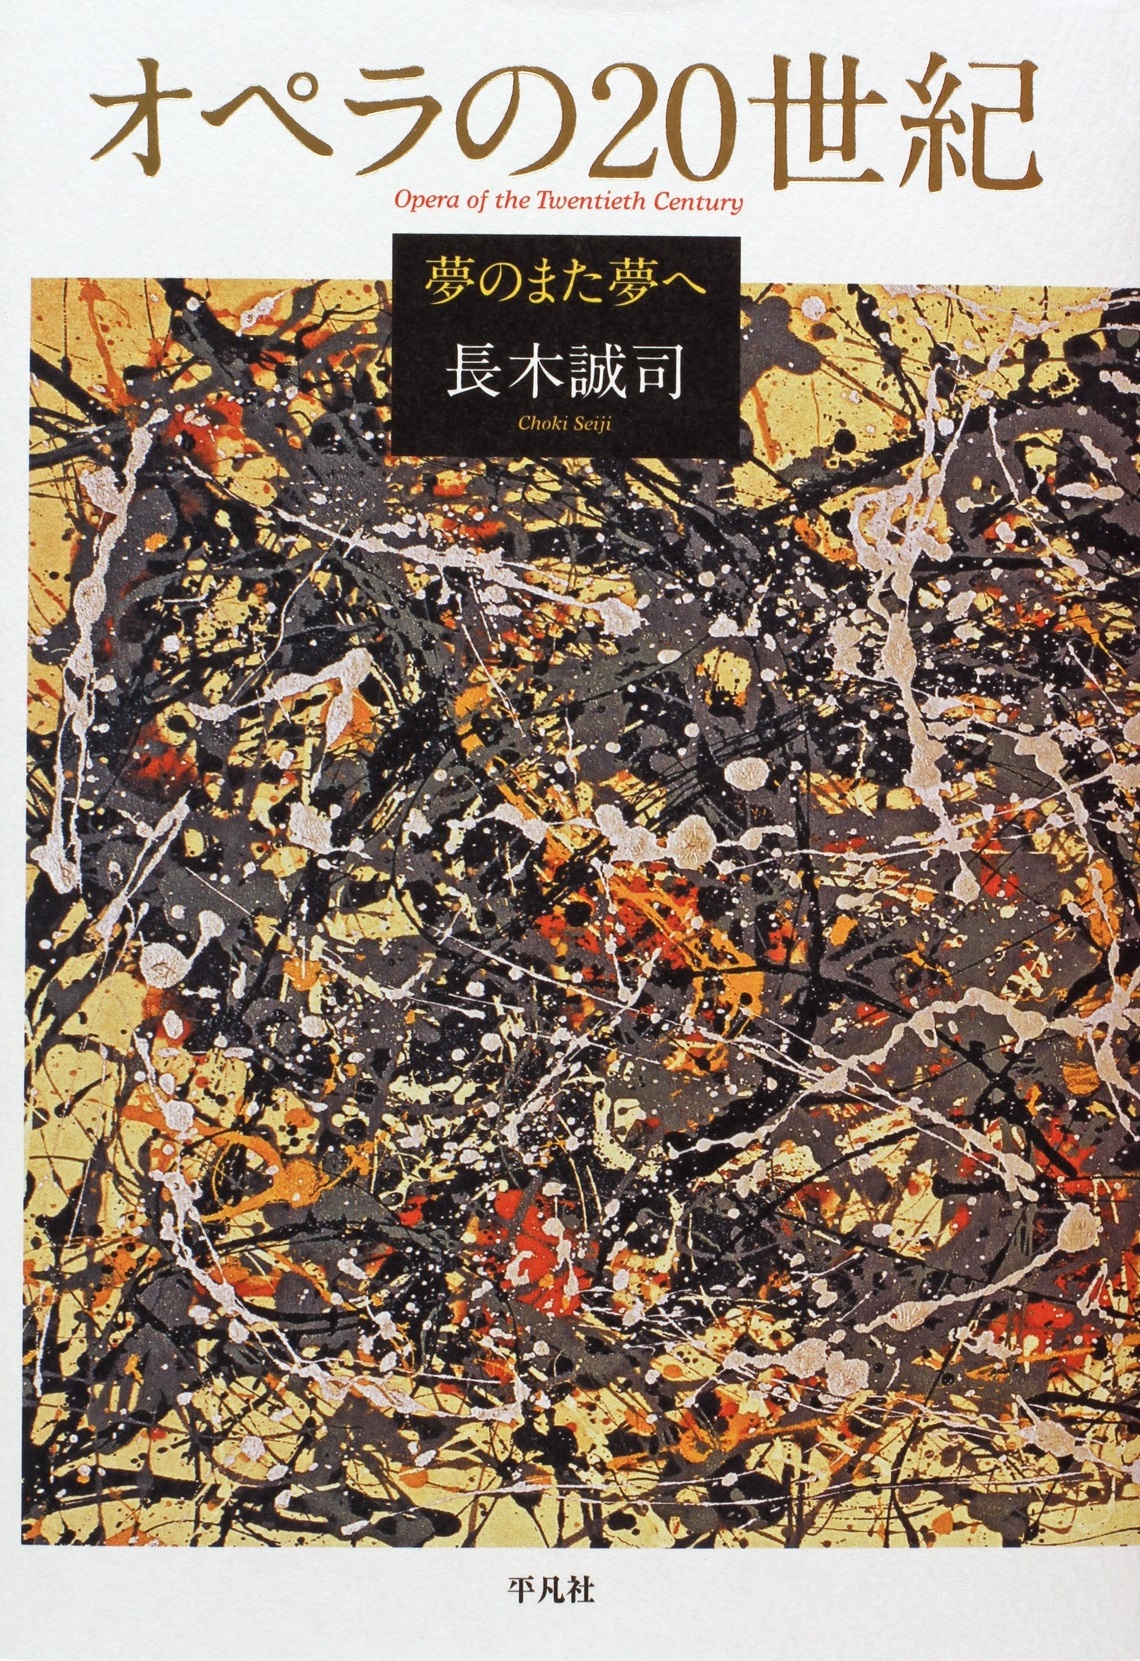 The cover with drip painting by Jackson Pollock